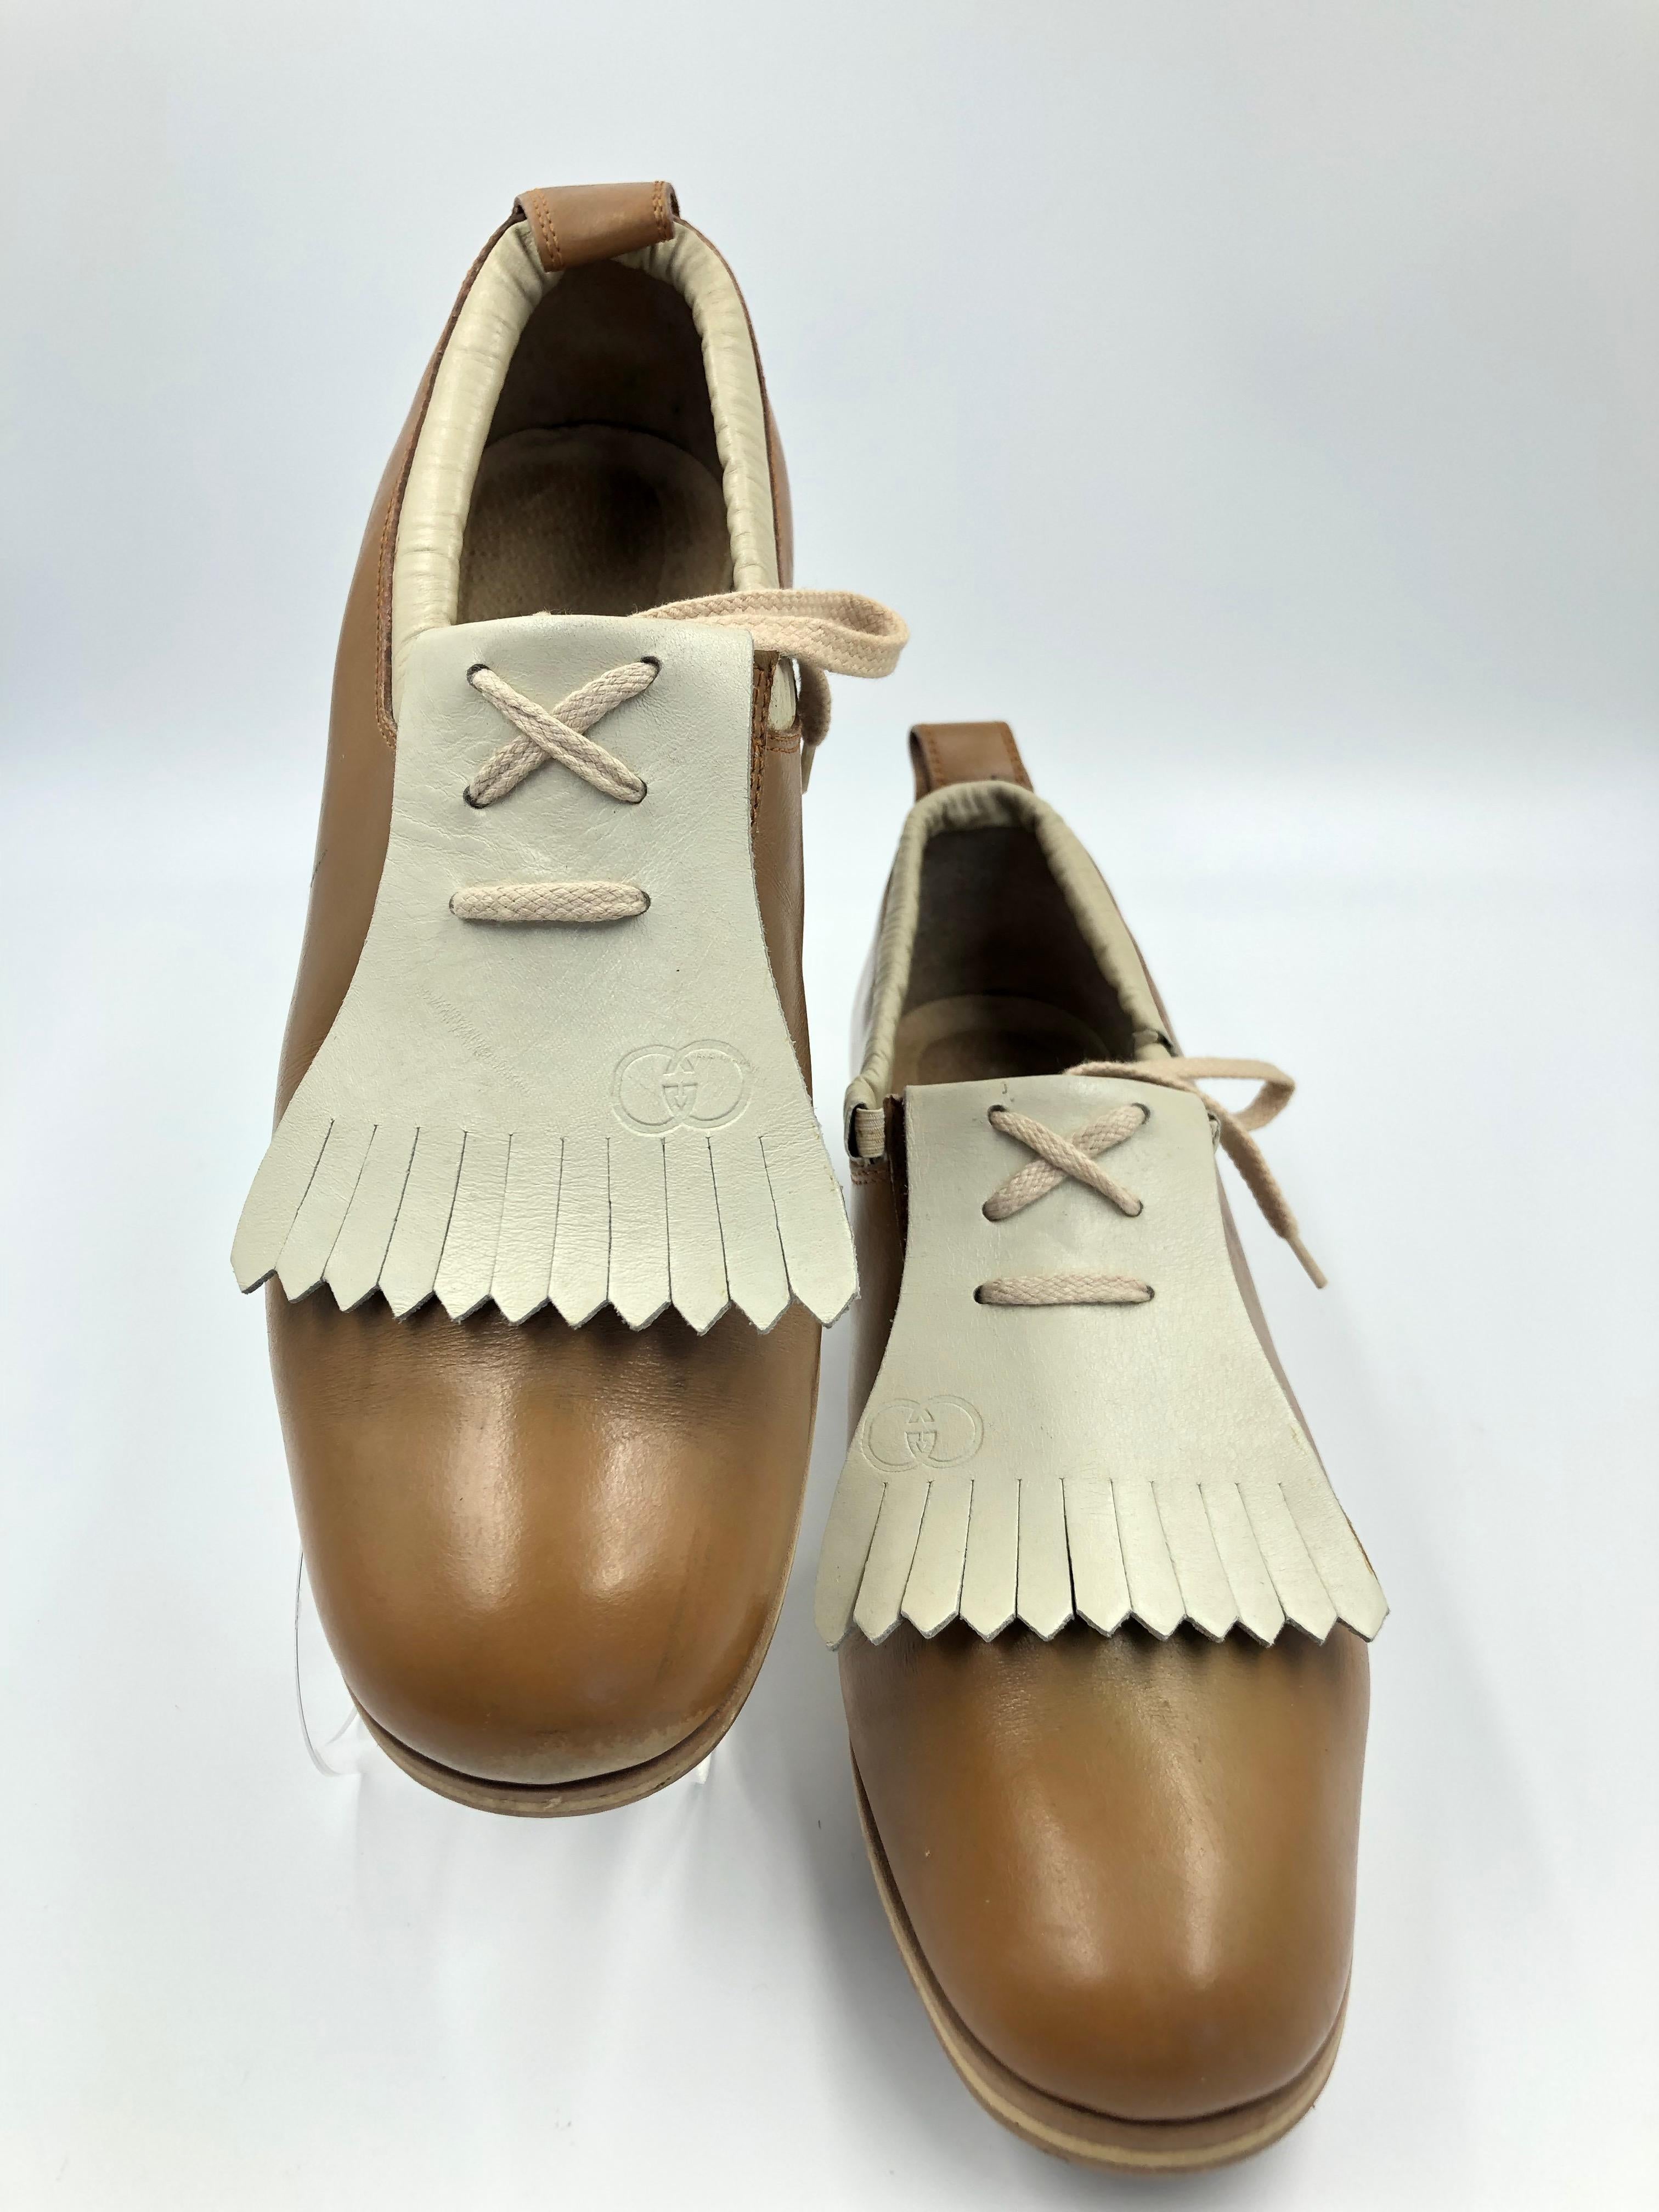 Gucci Collectors Vintage Golf Shoe with Cleats Tan and Cream 6